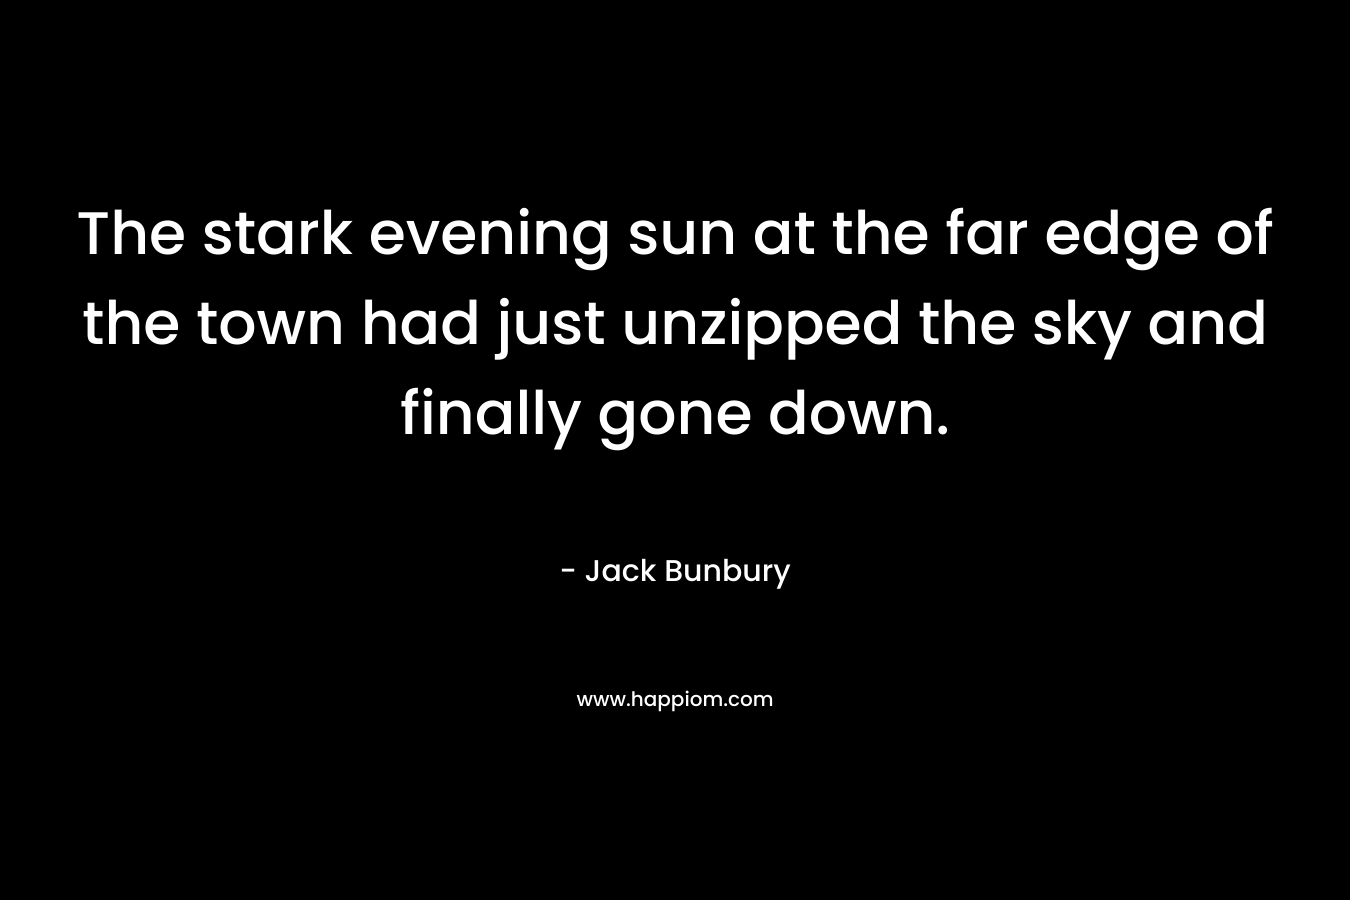 The stark evening sun at the far edge of the town had just unzipped the sky and finally gone down. – Jack Bunbury